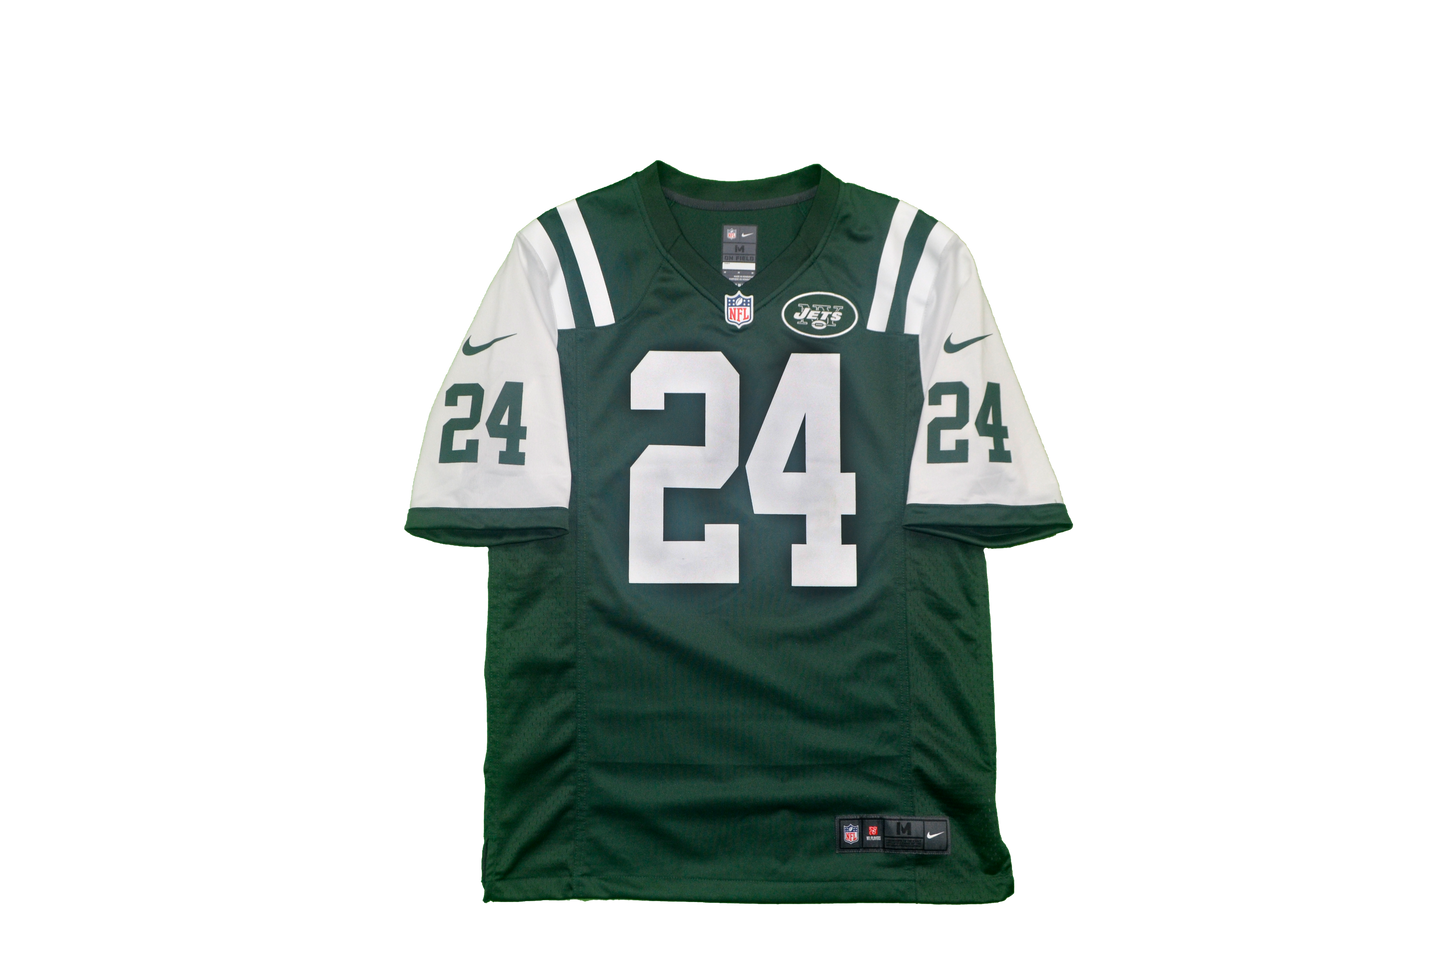 2012 NEW YORK JETS REVIS #24 NIKE GAME JERSEY (HOME) M